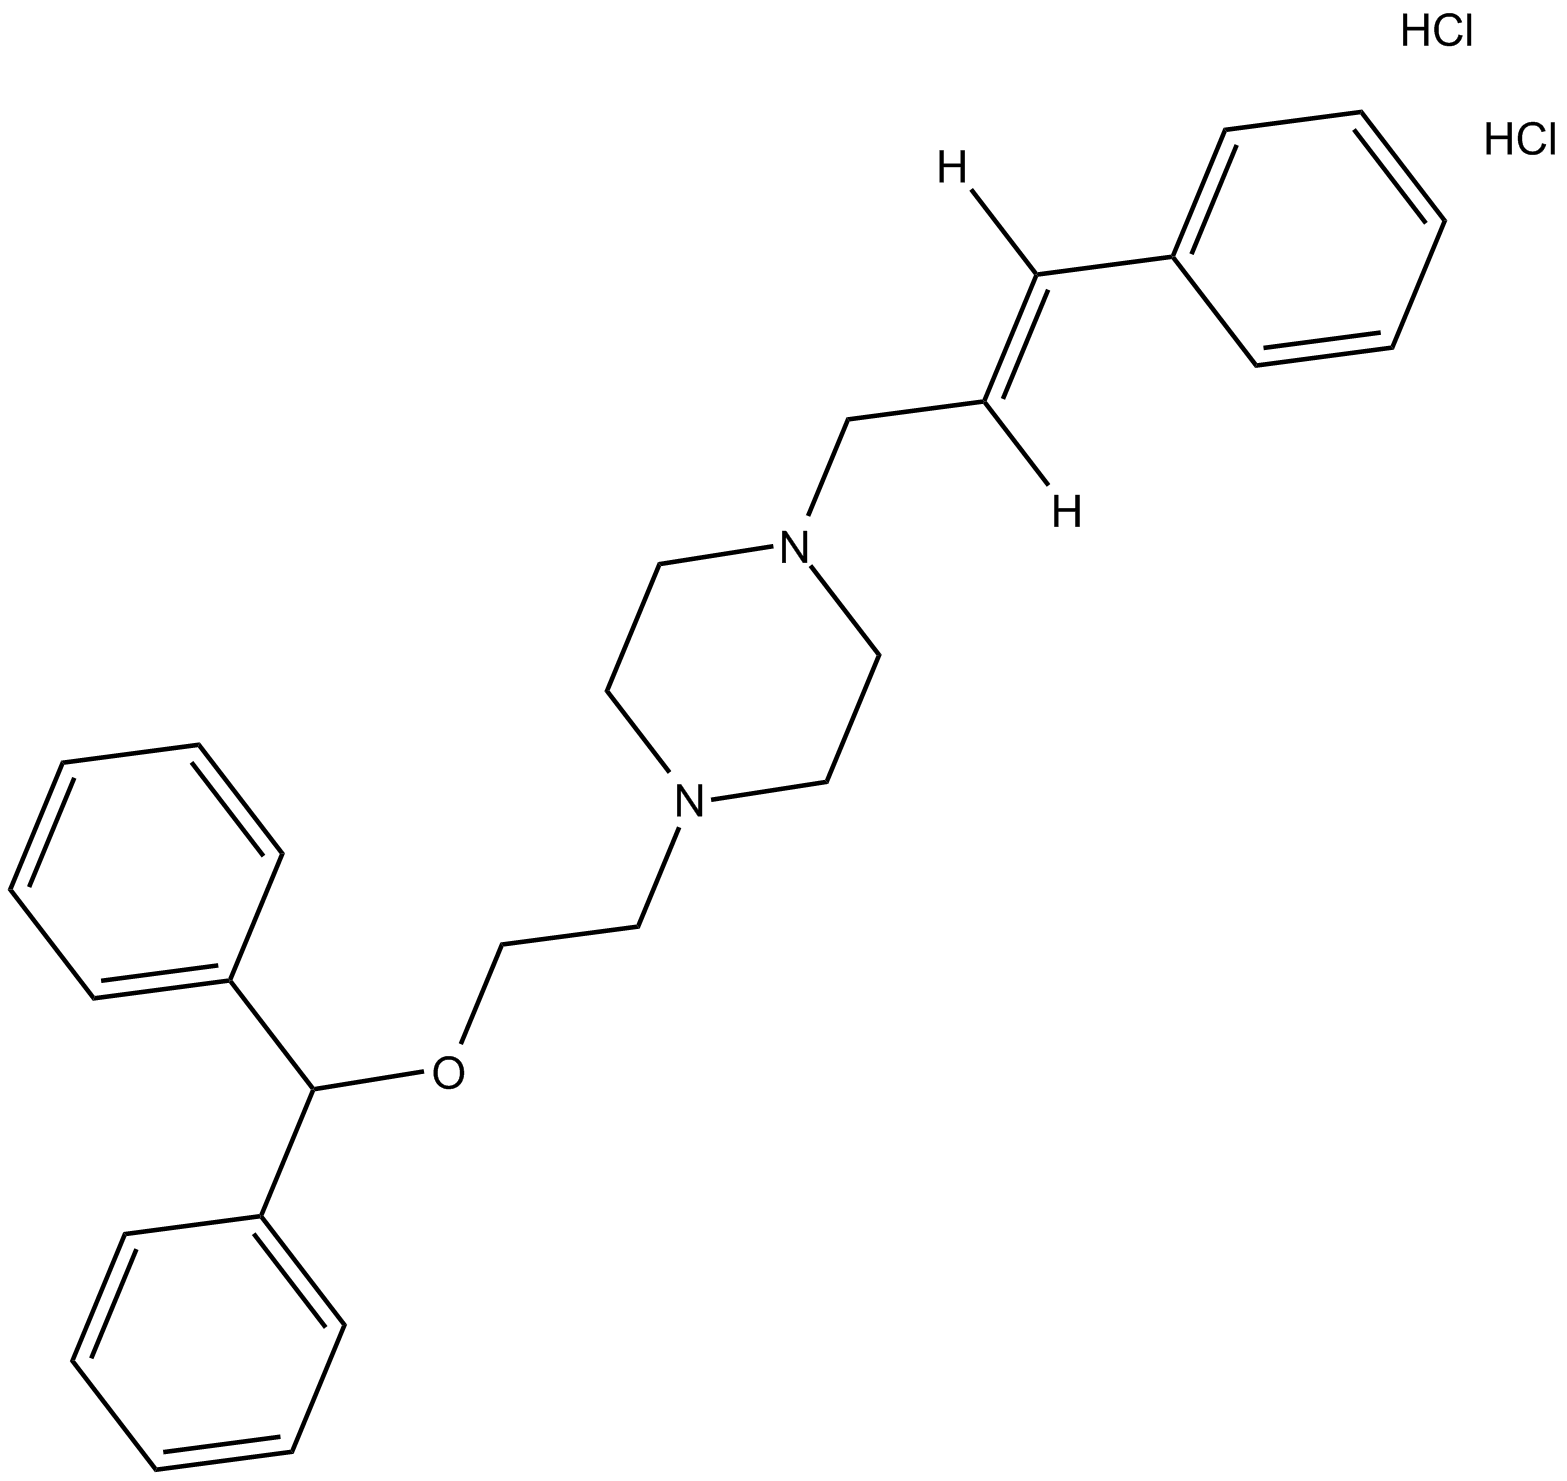 GBR 12783 dihydrochloride  Chemical Structure